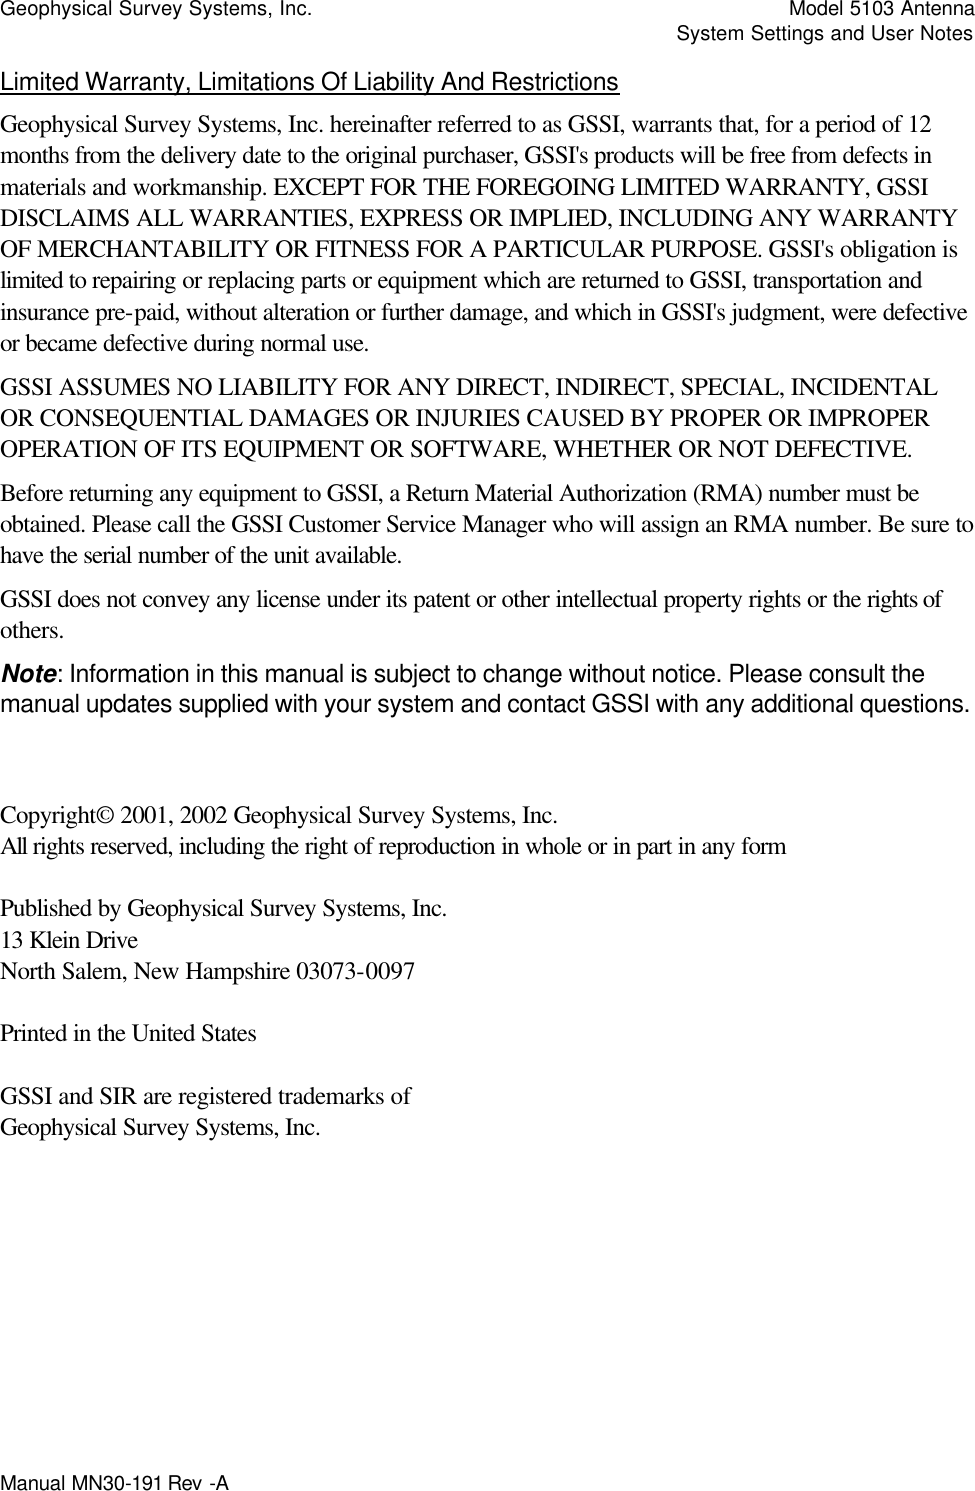 Geophysical Survey Systems, Inc.    Model 5103 Antenna     System Settings and User Notes Manual MN30-191 Rev -A   Limited Warranty, Limitations Of Liability And Restrictions Geophysical Survey Systems, Inc. hereinafter referred to as GSSI, warrants that, for a period of 12 months from the delivery date to the original purchaser, GSSI&apos;s products will be free from defects in materials and workmanship. EXCEPT FOR THE FOREGOING LIMITED WARRANTY, GSSI DISCLAIMS ALL WARRANTIES, EXPRESS OR IMPLIED, INCLUDING ANY WARRANTY OF MERCHANTABILITY OR FITNESS FOR A PARTICULAR PURPOSE. GSSI&apos;s obligation is limited to repairing or replacing parts or equipment which are returned to GSSI, transportation and insurance pre-paid, without alteration or further damage, and which in GSSI&apos;s judgment, were defective or became defective during normal use. GSSI ASSUMES NO LIABILITY FOR ANY DIRECT, INDIRECT, SPECIAL, INCIDENTAL OR CONSEQUENTIAL DAMAGES OR INJURIES CAUSED BY PROPER OR IMPROPER OPERATION OF ITS EQUIPMENT OR SOFTWARE, WHETHER OR NOT DEFECTIVE. Before returning any equipment to GSSI, a Return Material Authorization (RMA) number must be obtained. Please call the GSSI Customer Service Manager who will assign an RMA number. Be sure to have the serial number of the unit available. GSSI does not convey any license under its patent or other intellectual property rights or the rights of others. Note: Information in this manual is subject to change without notice. Please consult the manual updates supplied with your system and contact GSSI with any additional questions.   Copyright© 2001, 2002 Geophysical Survey Systems, Inc. All rights reserved, including the right of reproduction in whole or in part in any form  Published by Geophysical Survey Systems, Inc. 13 Klein Drive North Salem, New Hampshire 03073-0097  Printed in the United States  GSSI and SIR are registered trademarks of Geophysical Survey Systems, Inc. 